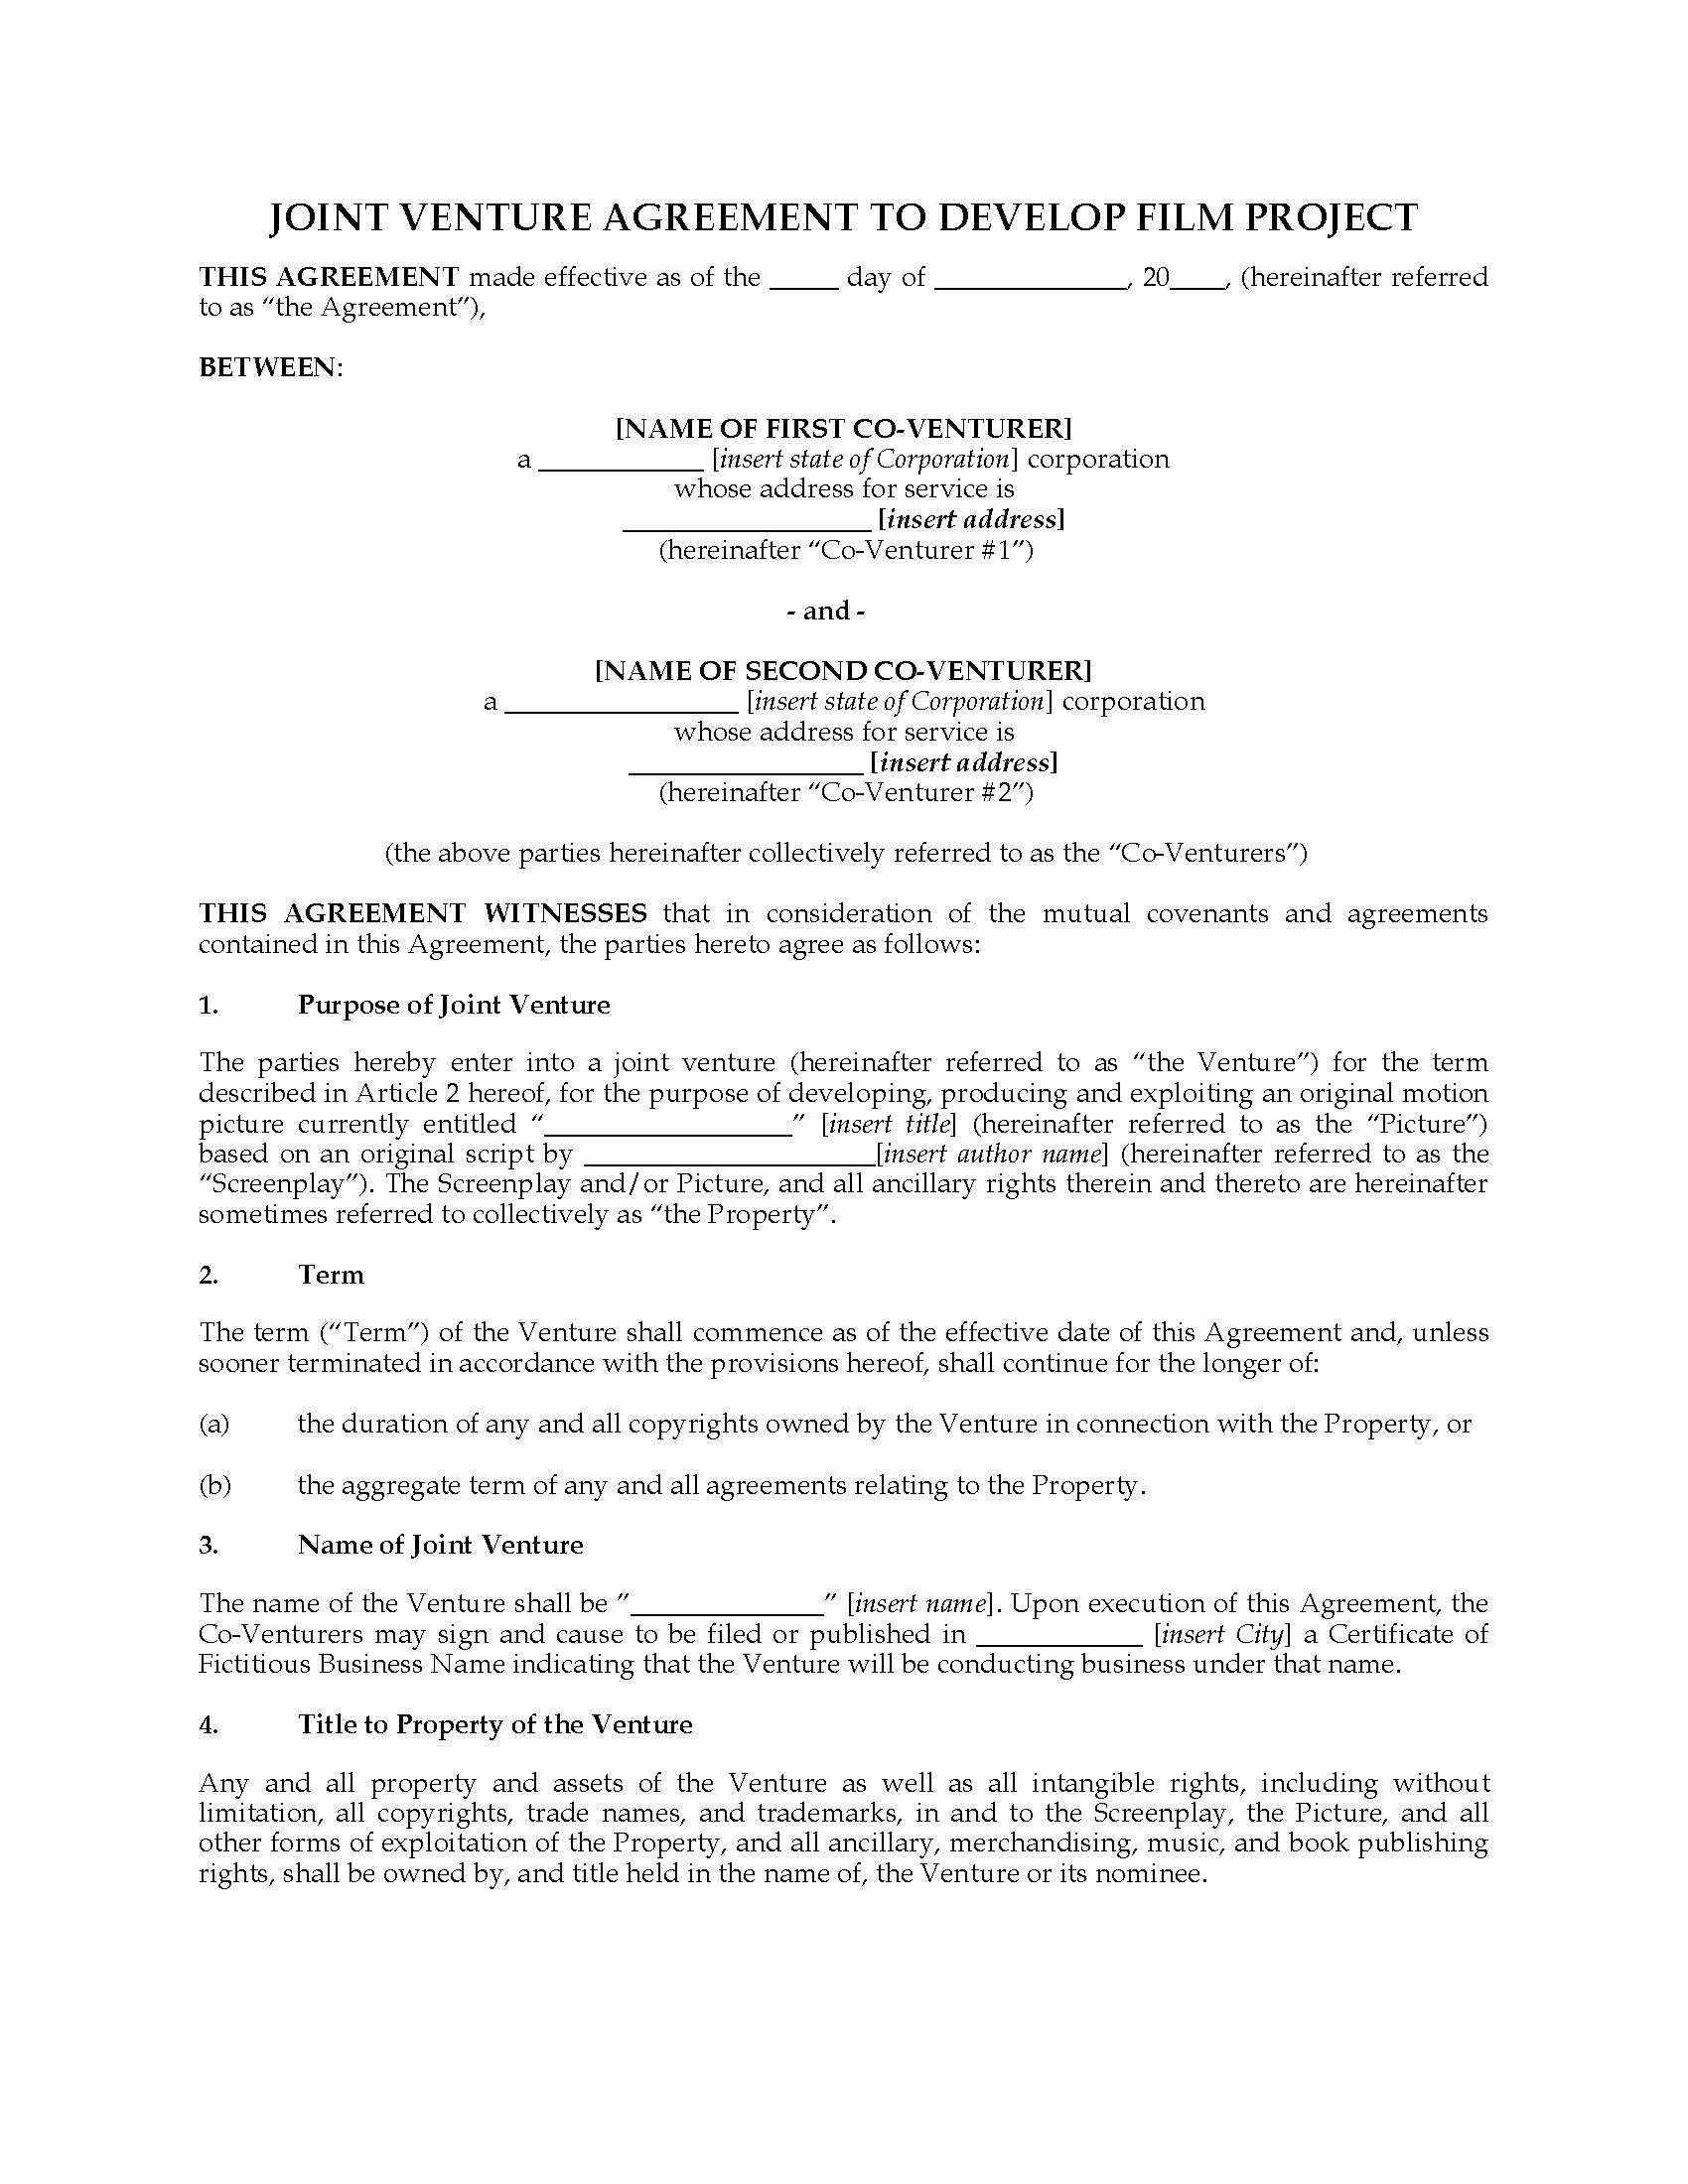 Joint Venture Agreement Template Lovely Project Joint Venture Agreement